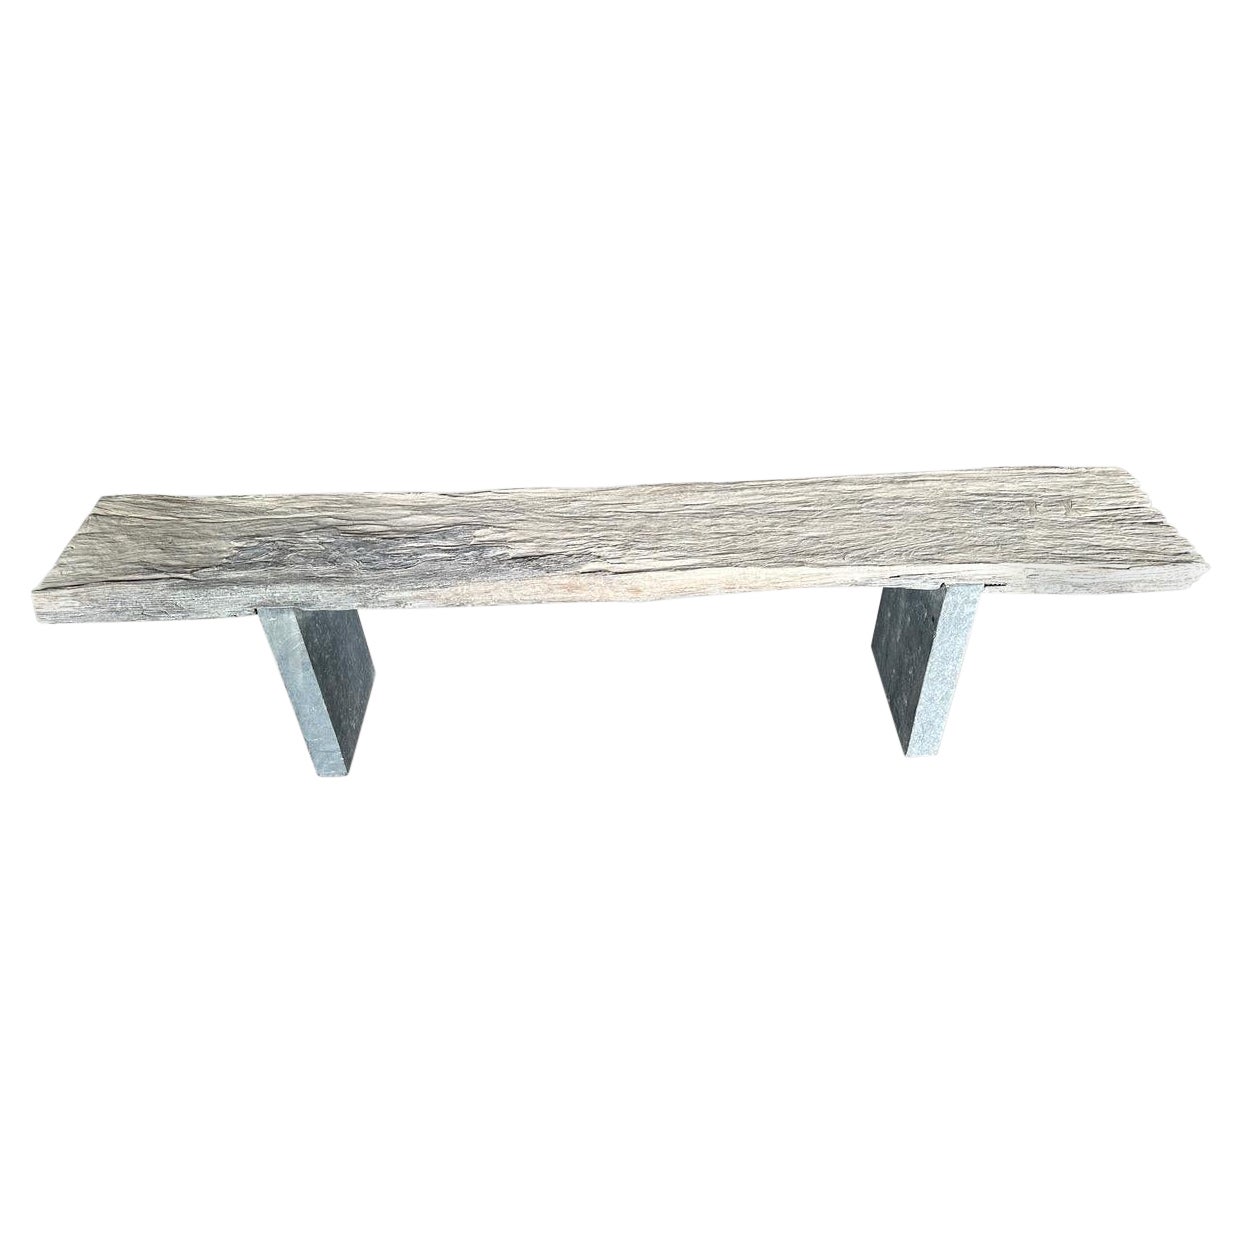 Andrianna Shamaris Wood and Granite Bench For Sale